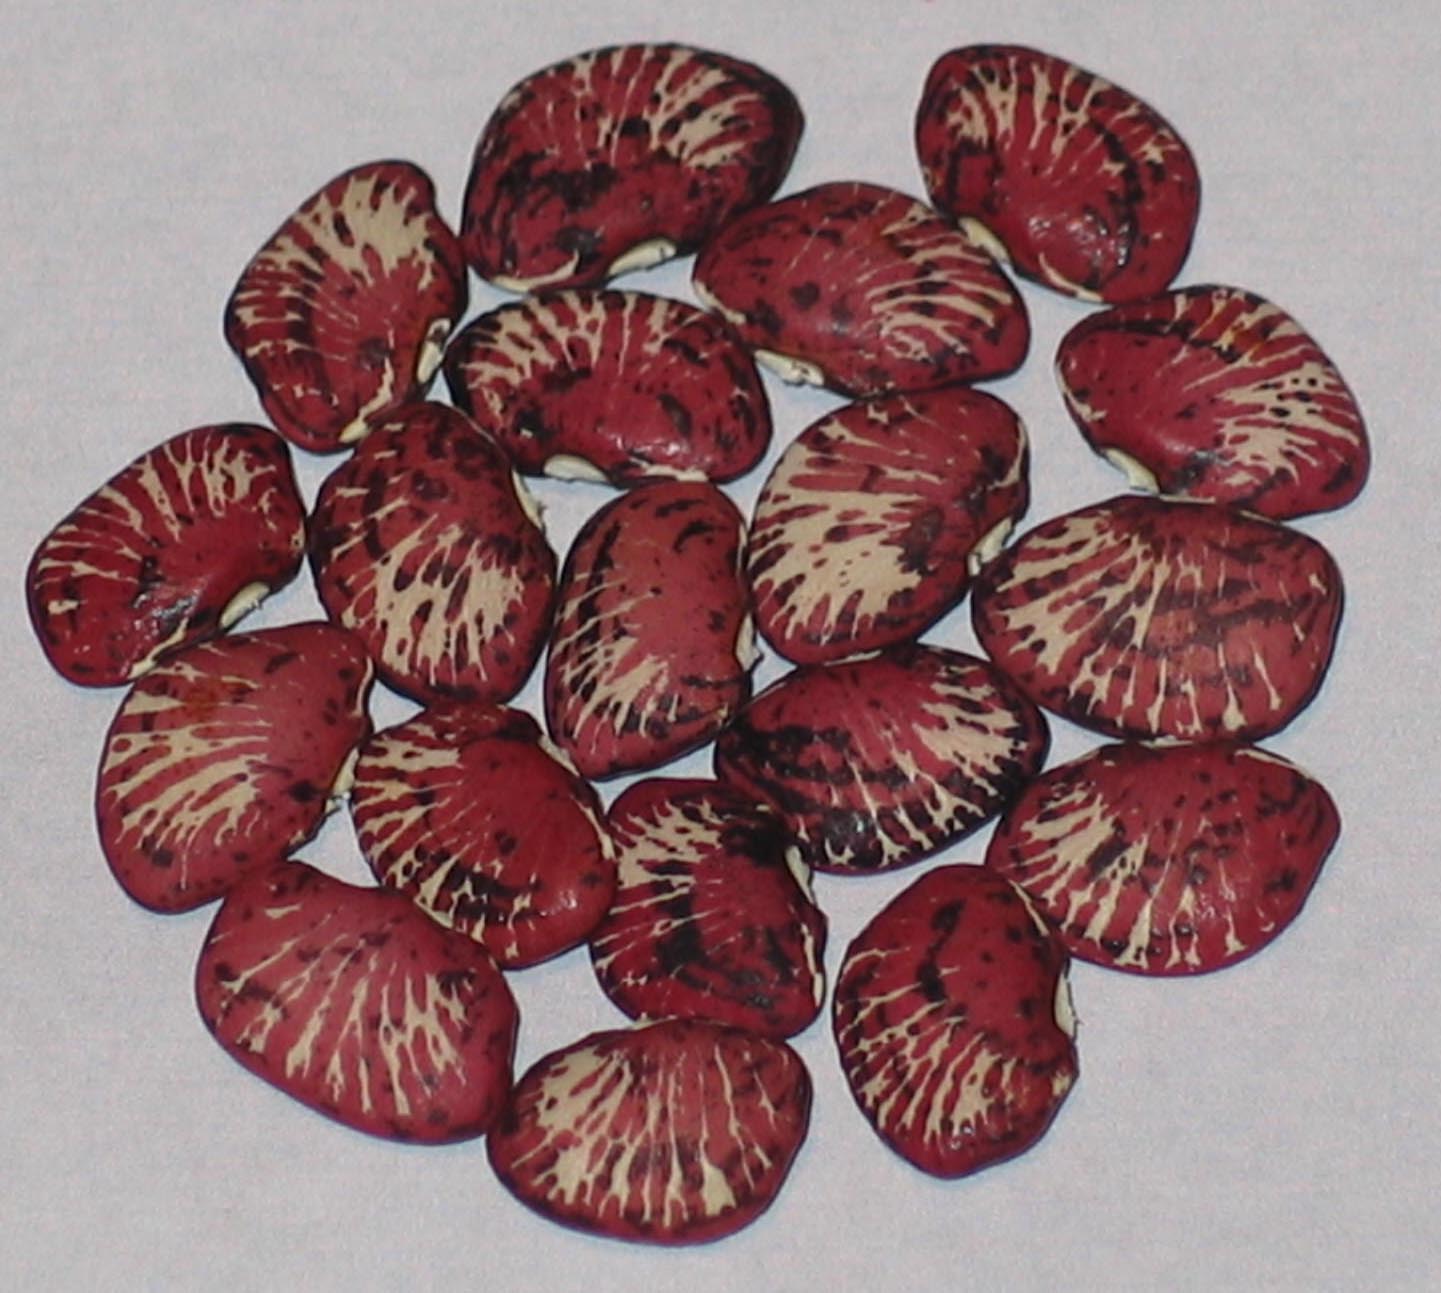 image of Andromeda Lima beans